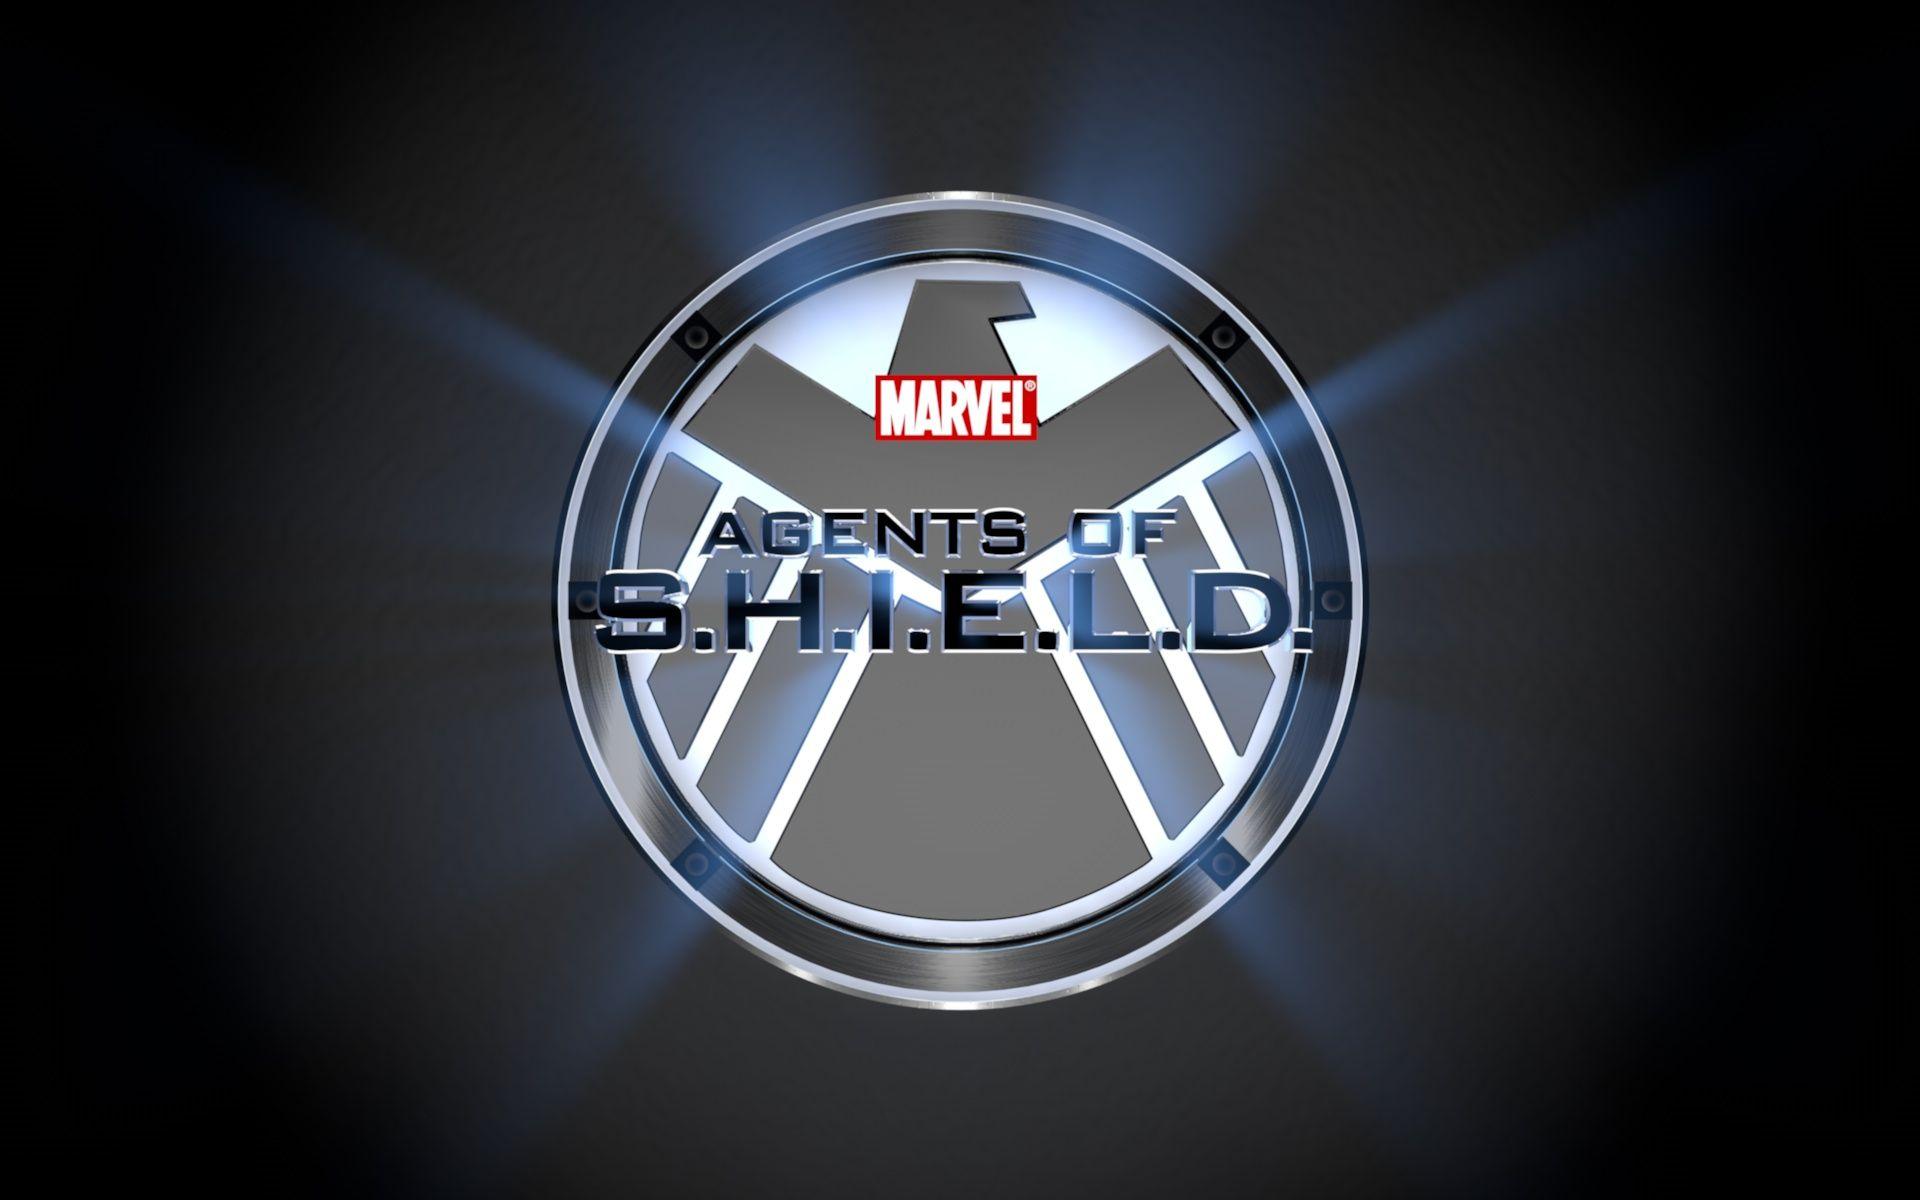 Marvels agents of shield